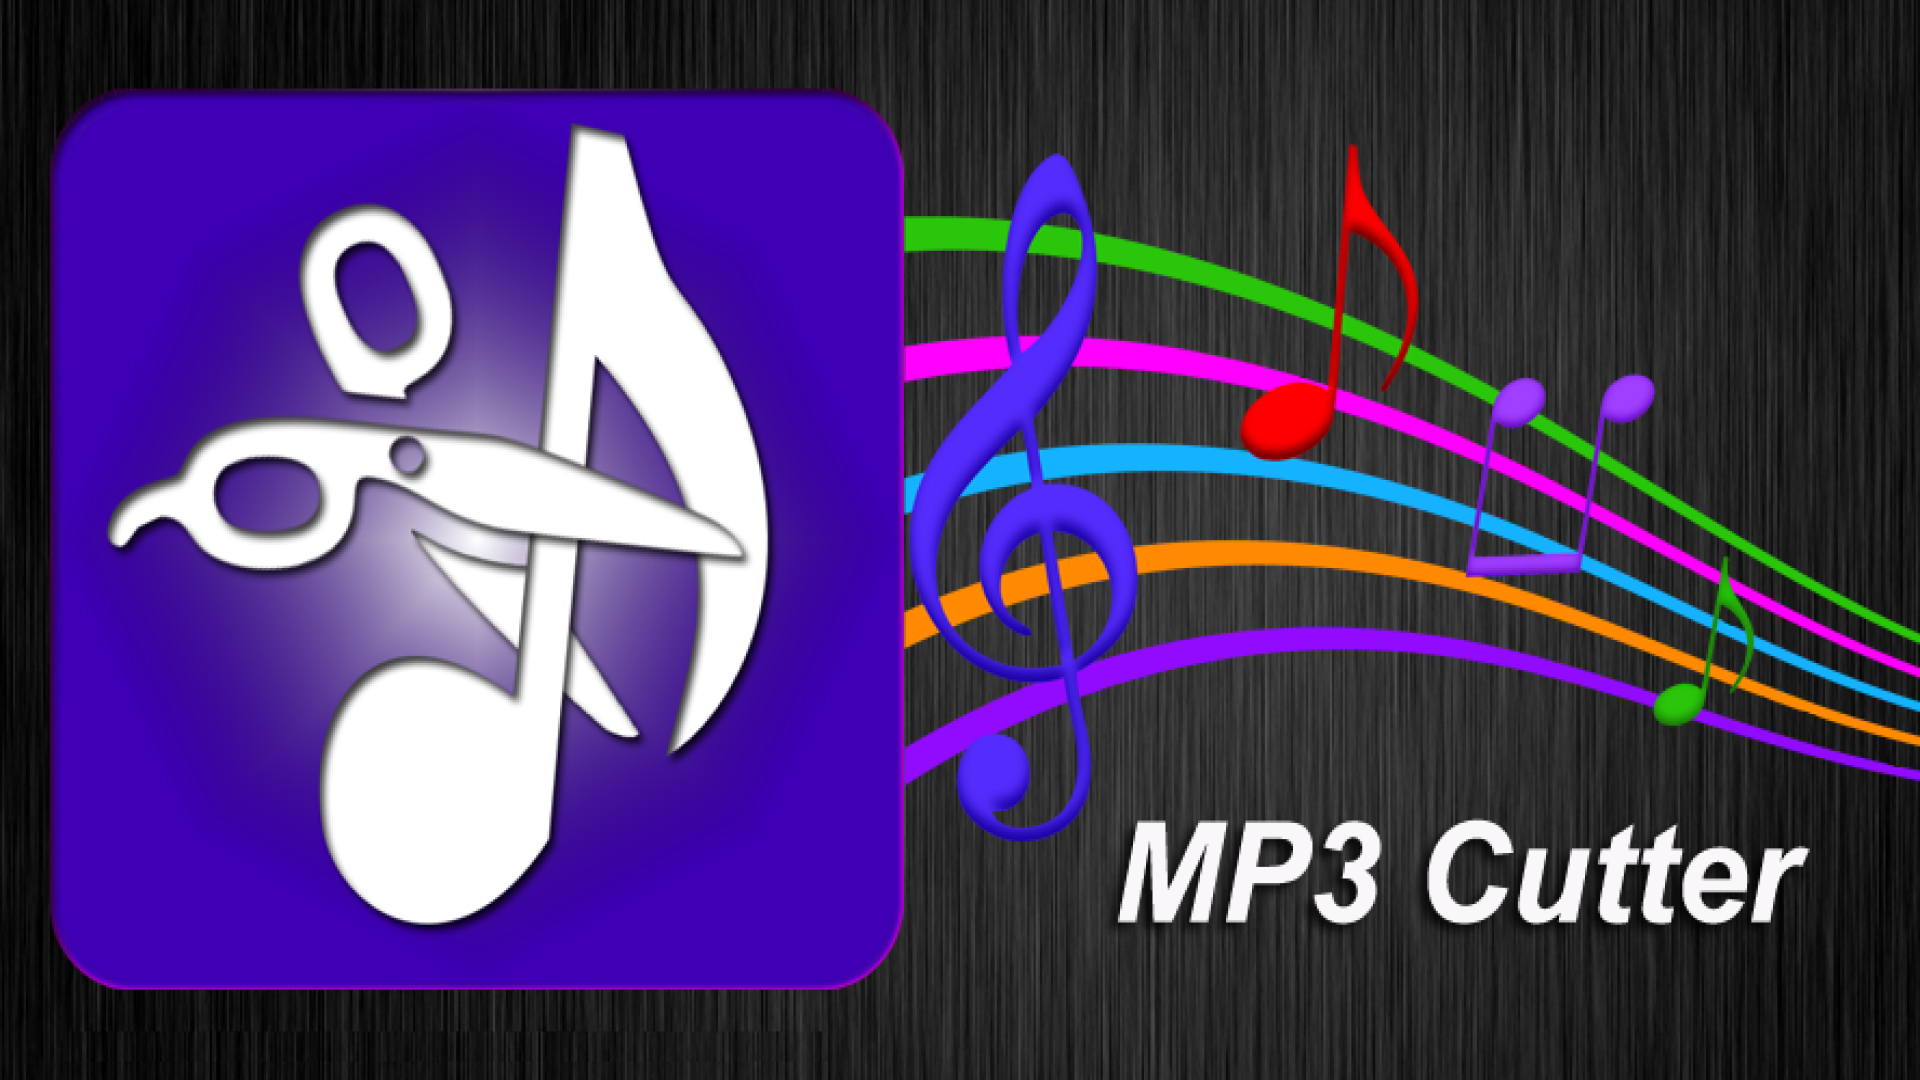 Best 7 MP3 Cutters to Simply Edit MP3 Audio